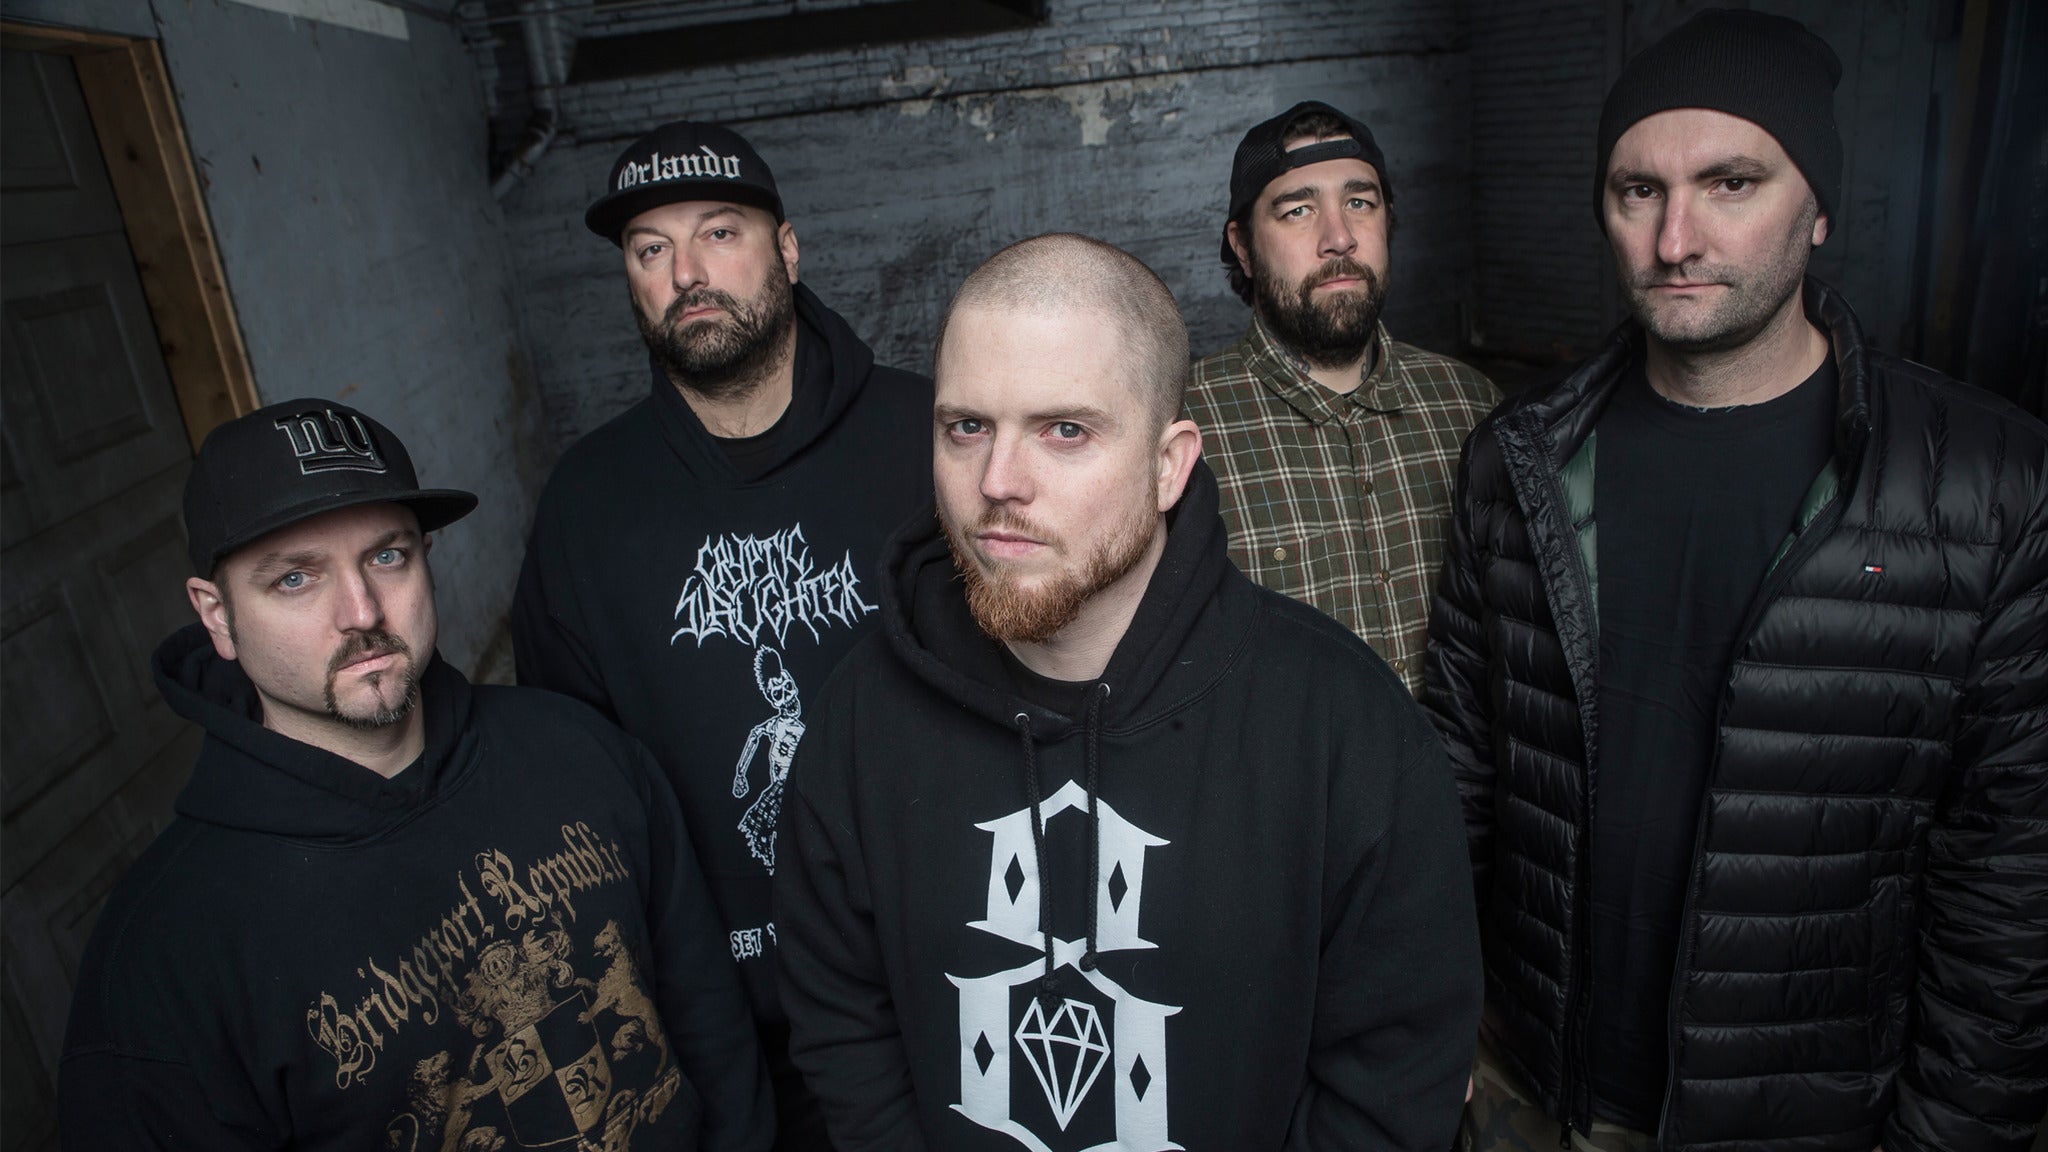 Hatebreed: 20 Years Of Perseverance Tour at Black Sheep